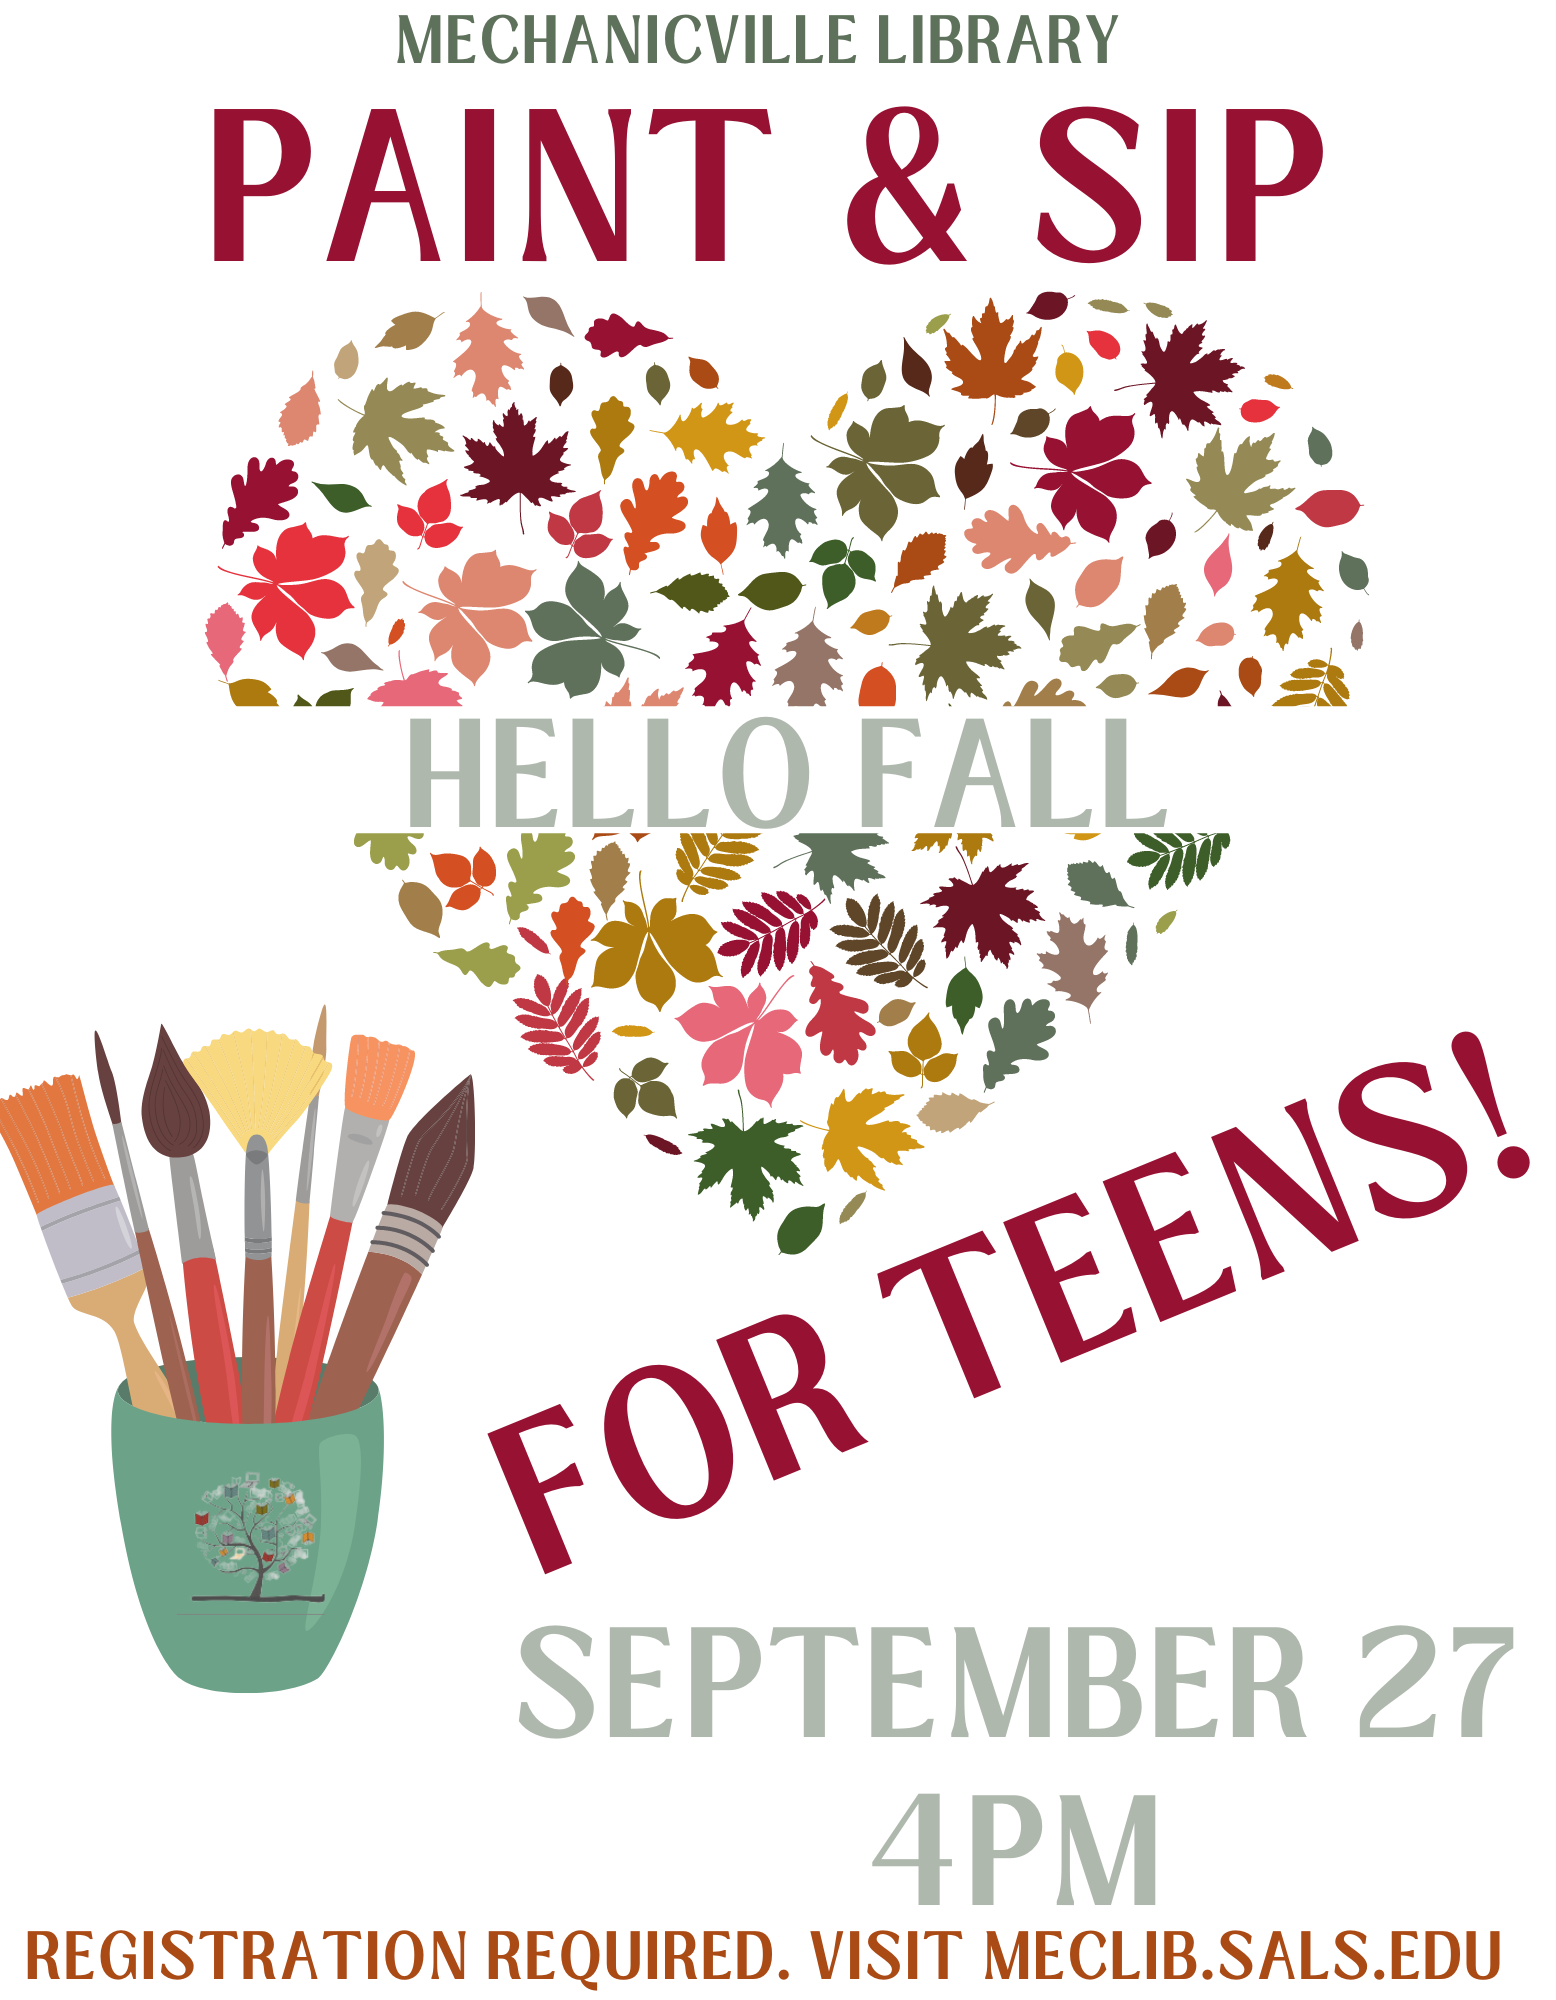 Teen Fall -Themed Paint & Sip @ Mechanicville District Public Library | Mechanicville | New York | United States